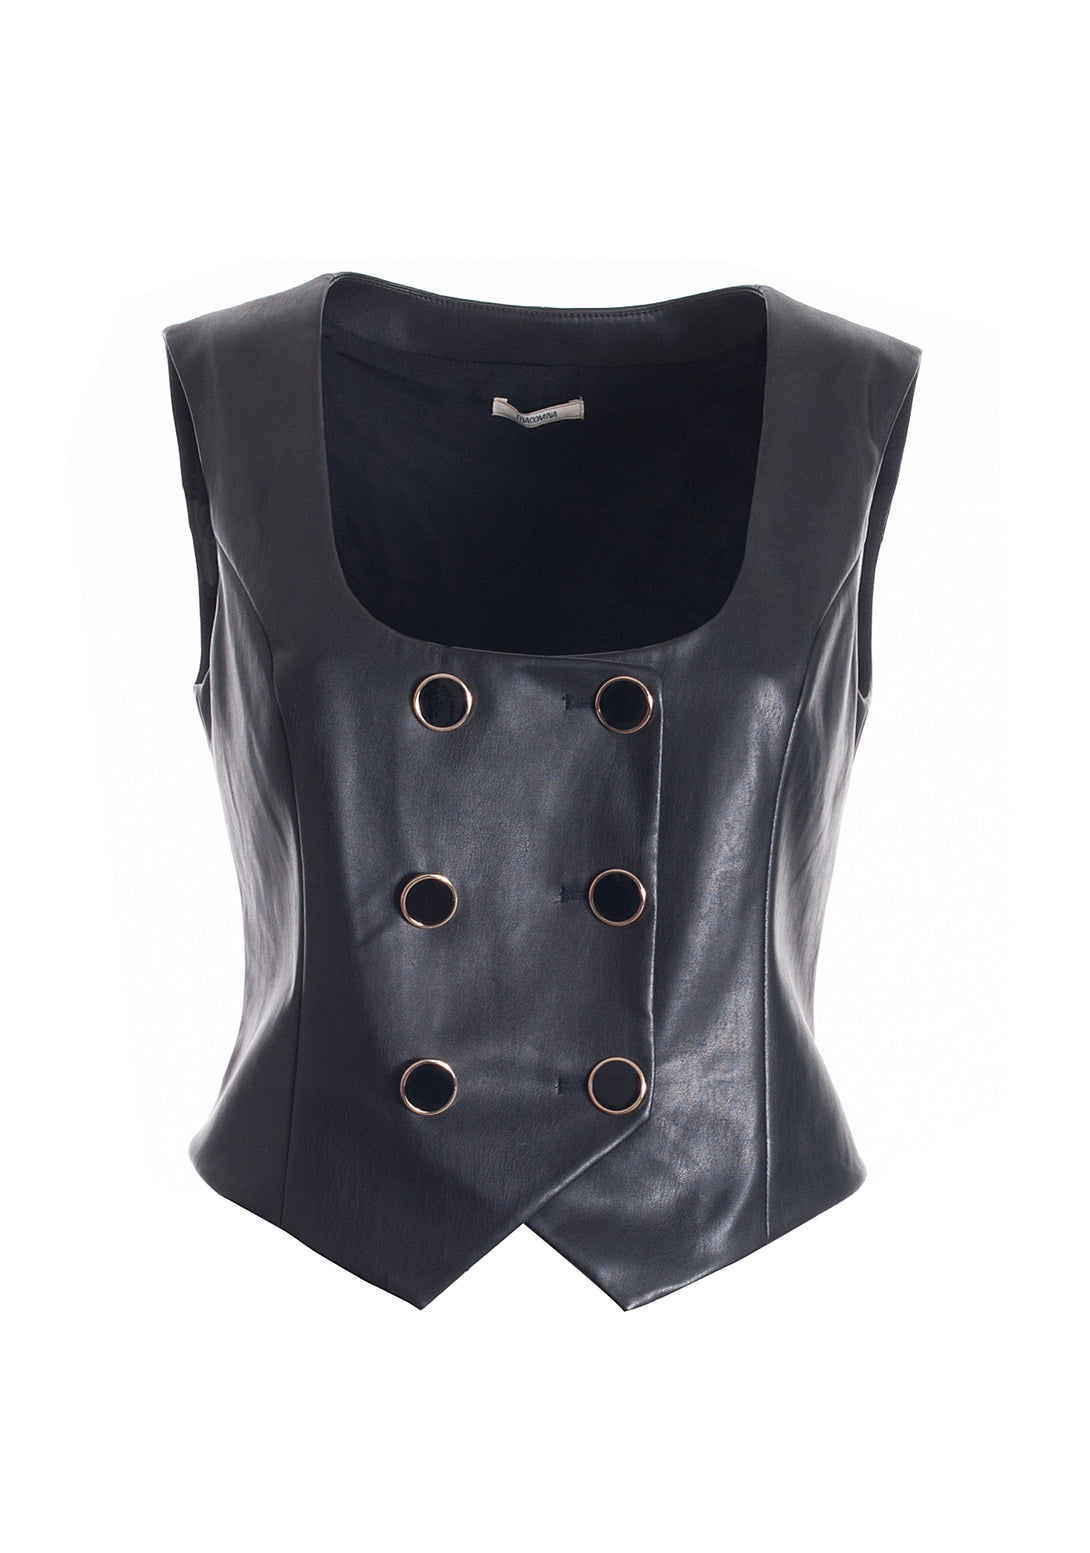 Gilet cropped tight fit made in eco leather